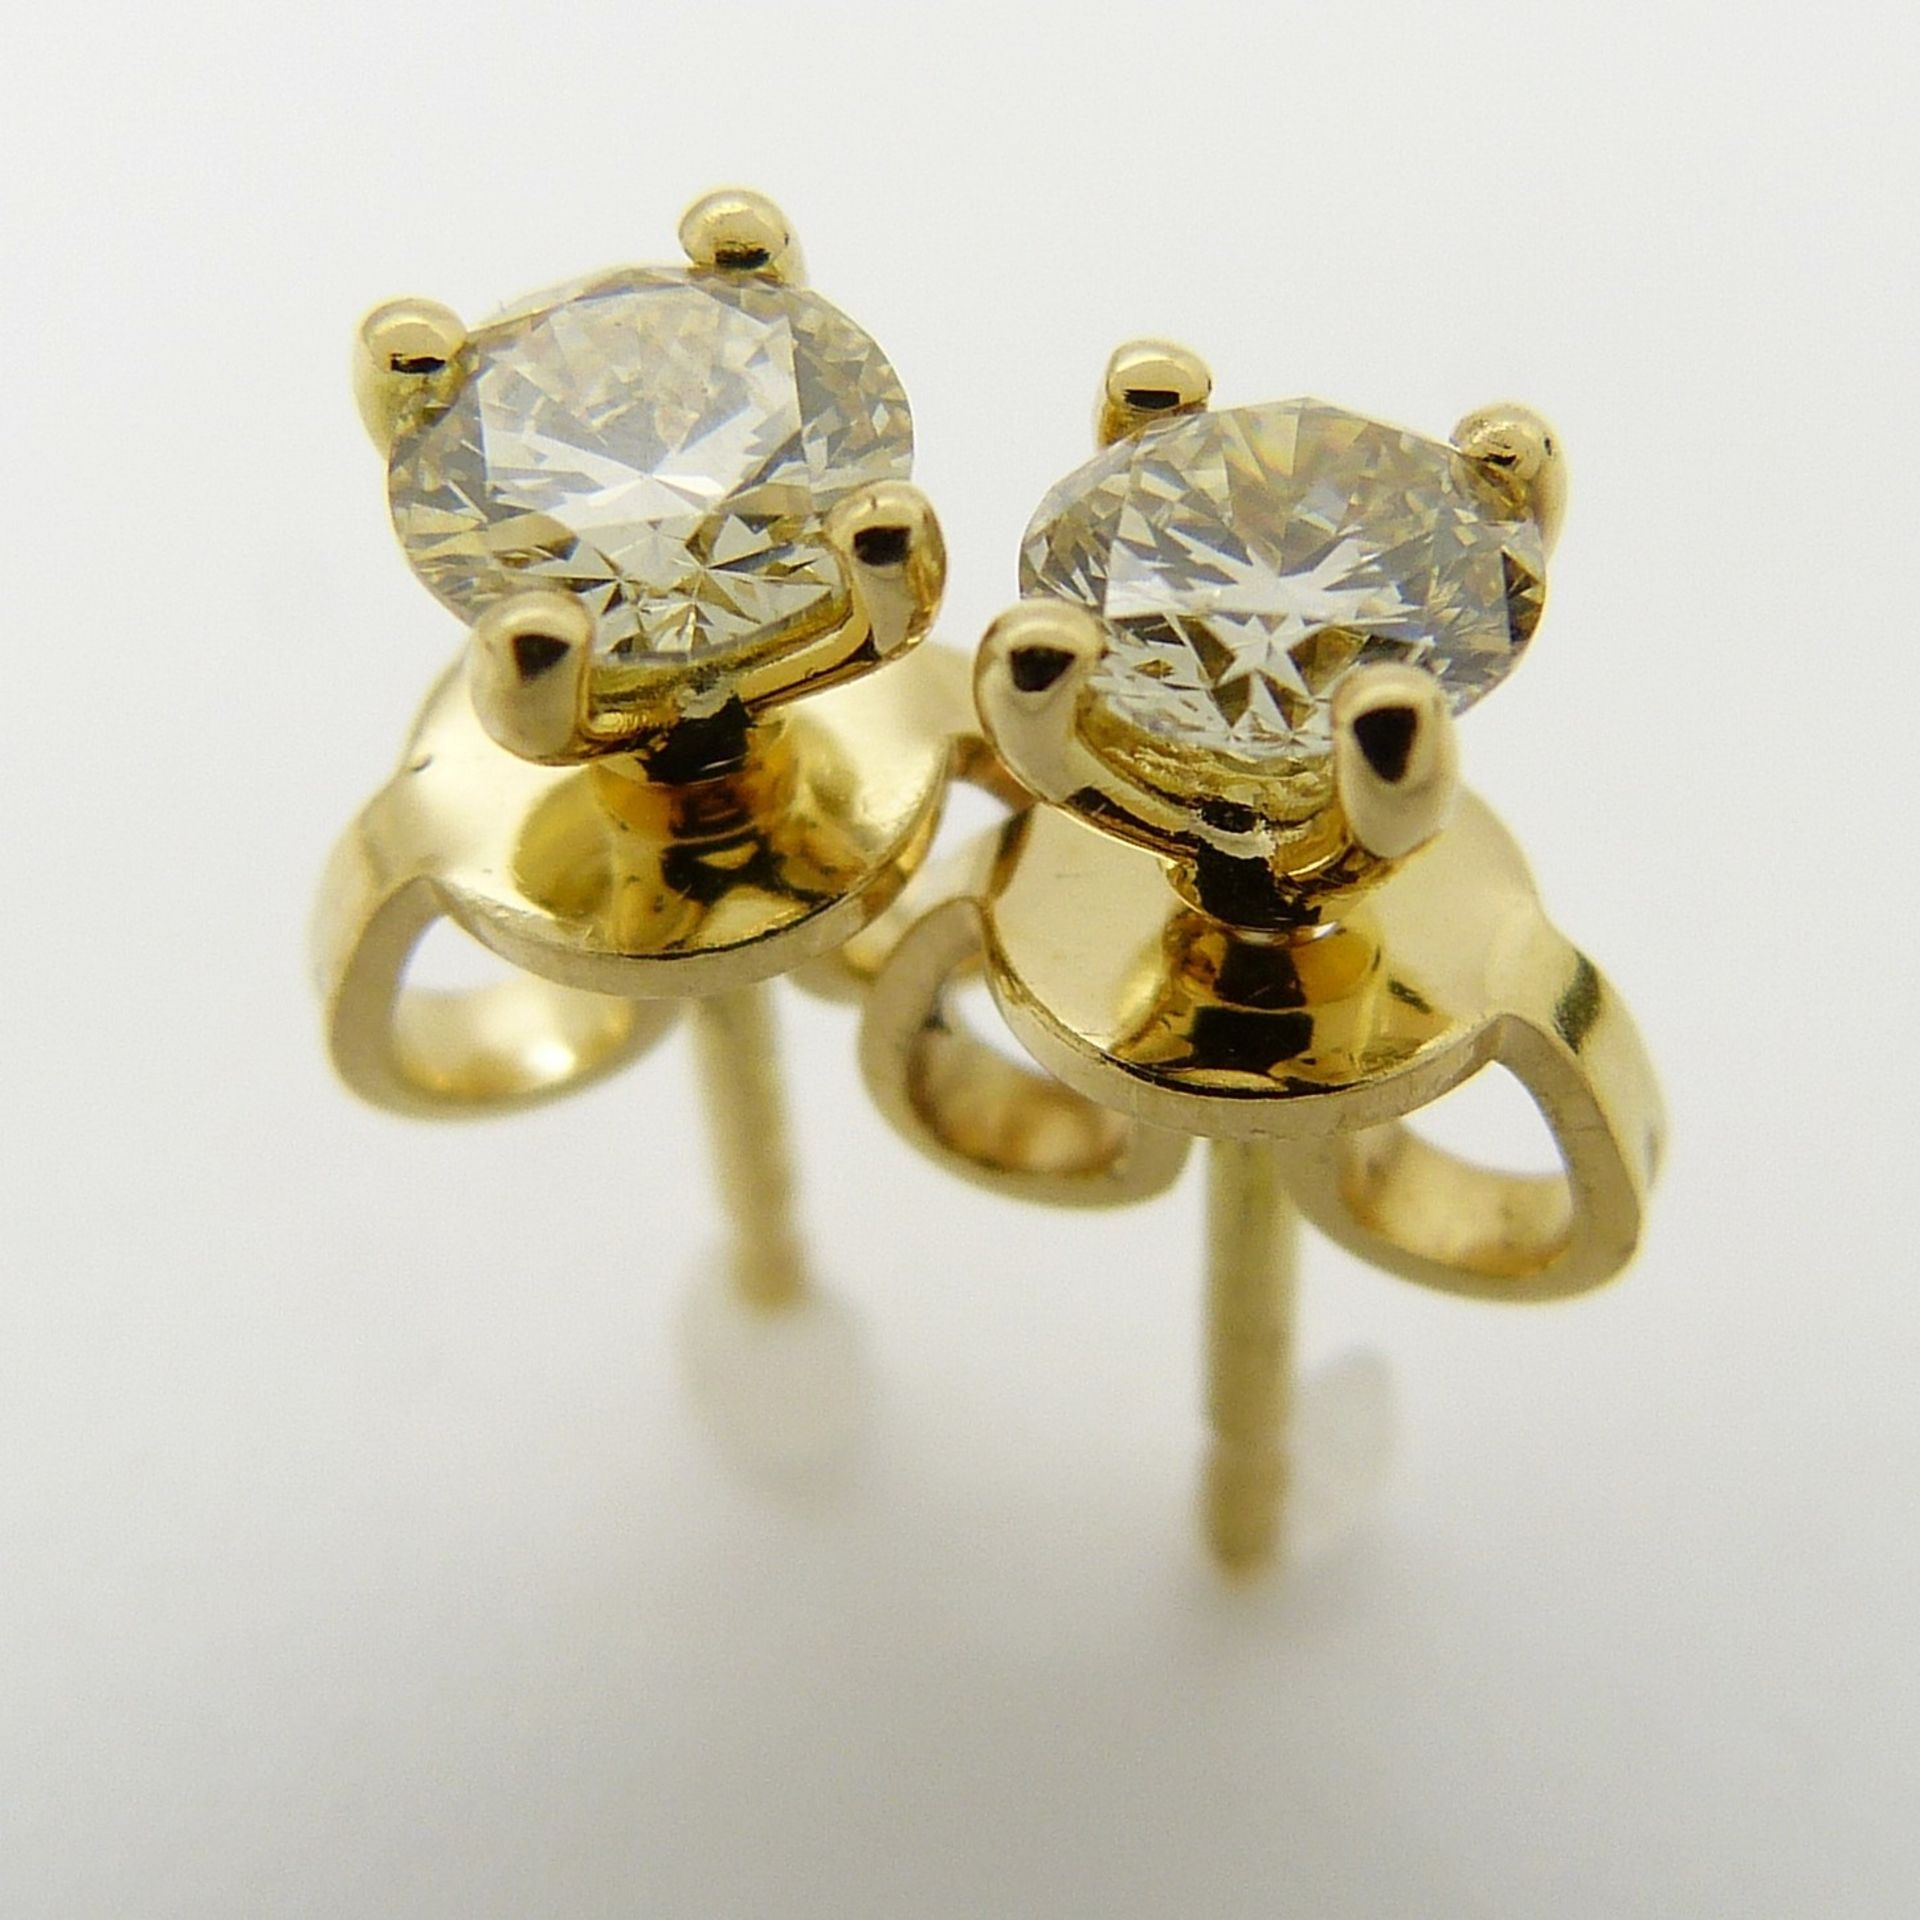 0.51 carat diamond ear studs in 18ct yellow gold, boxed - Image 4 of 6